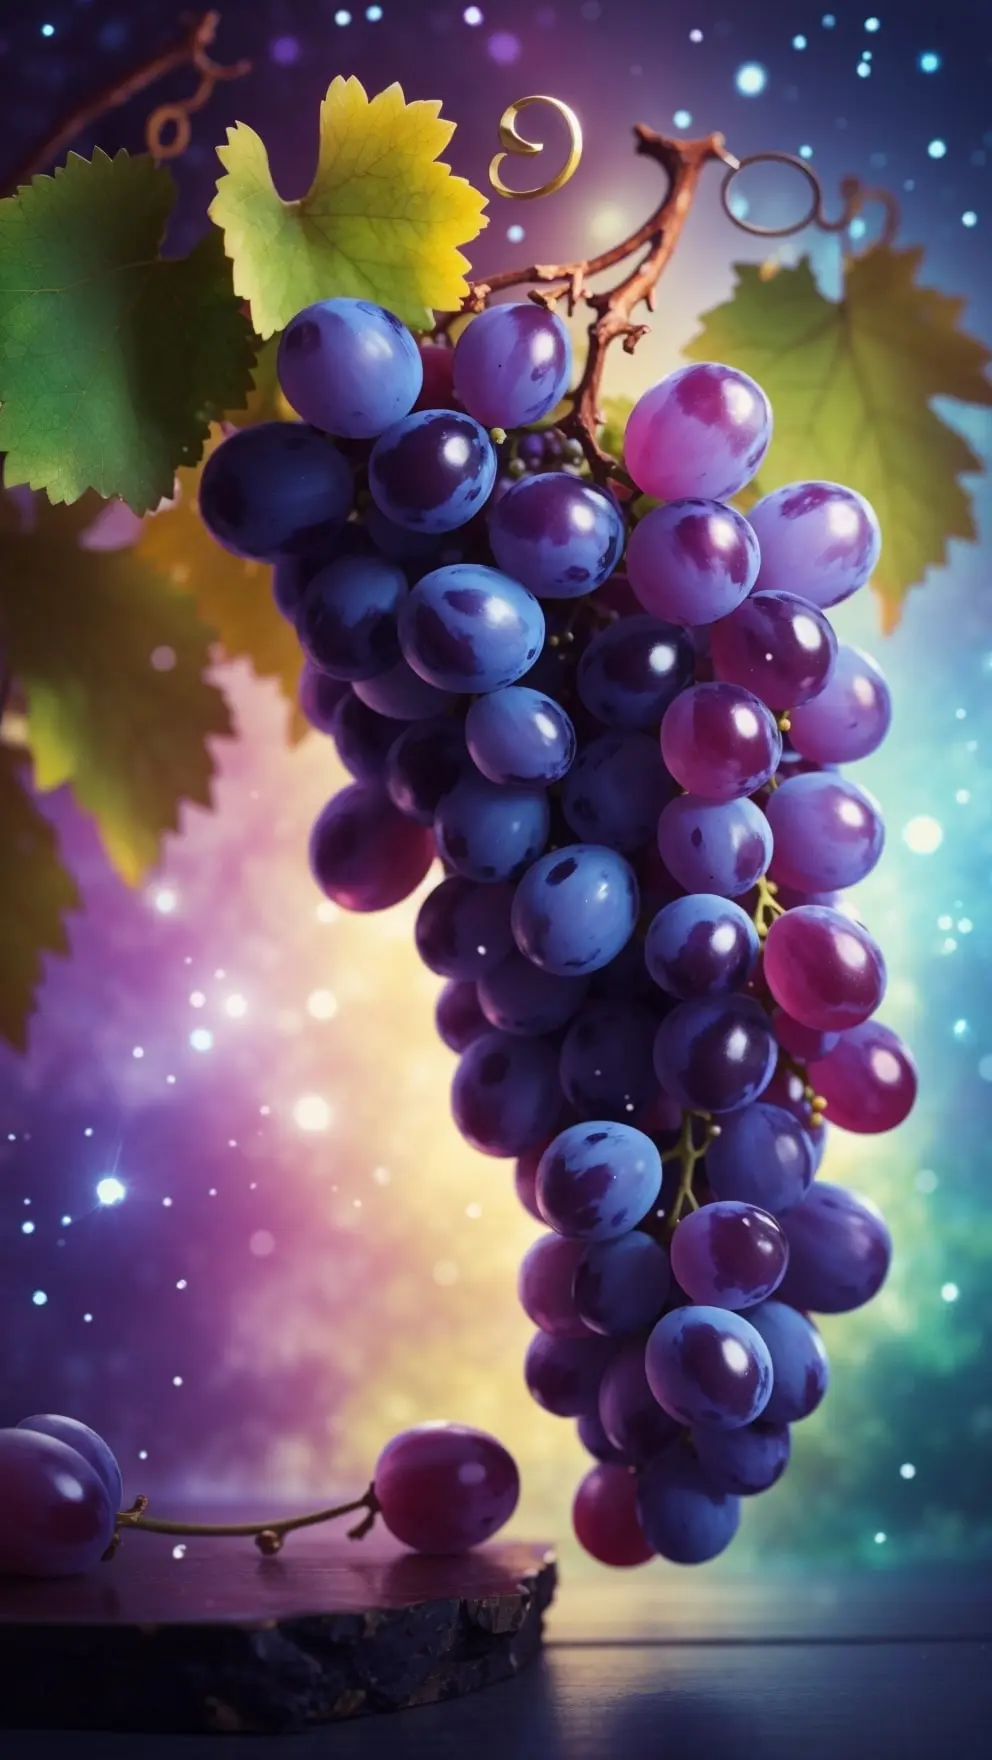 Grapes Wallpaper On Magical Background